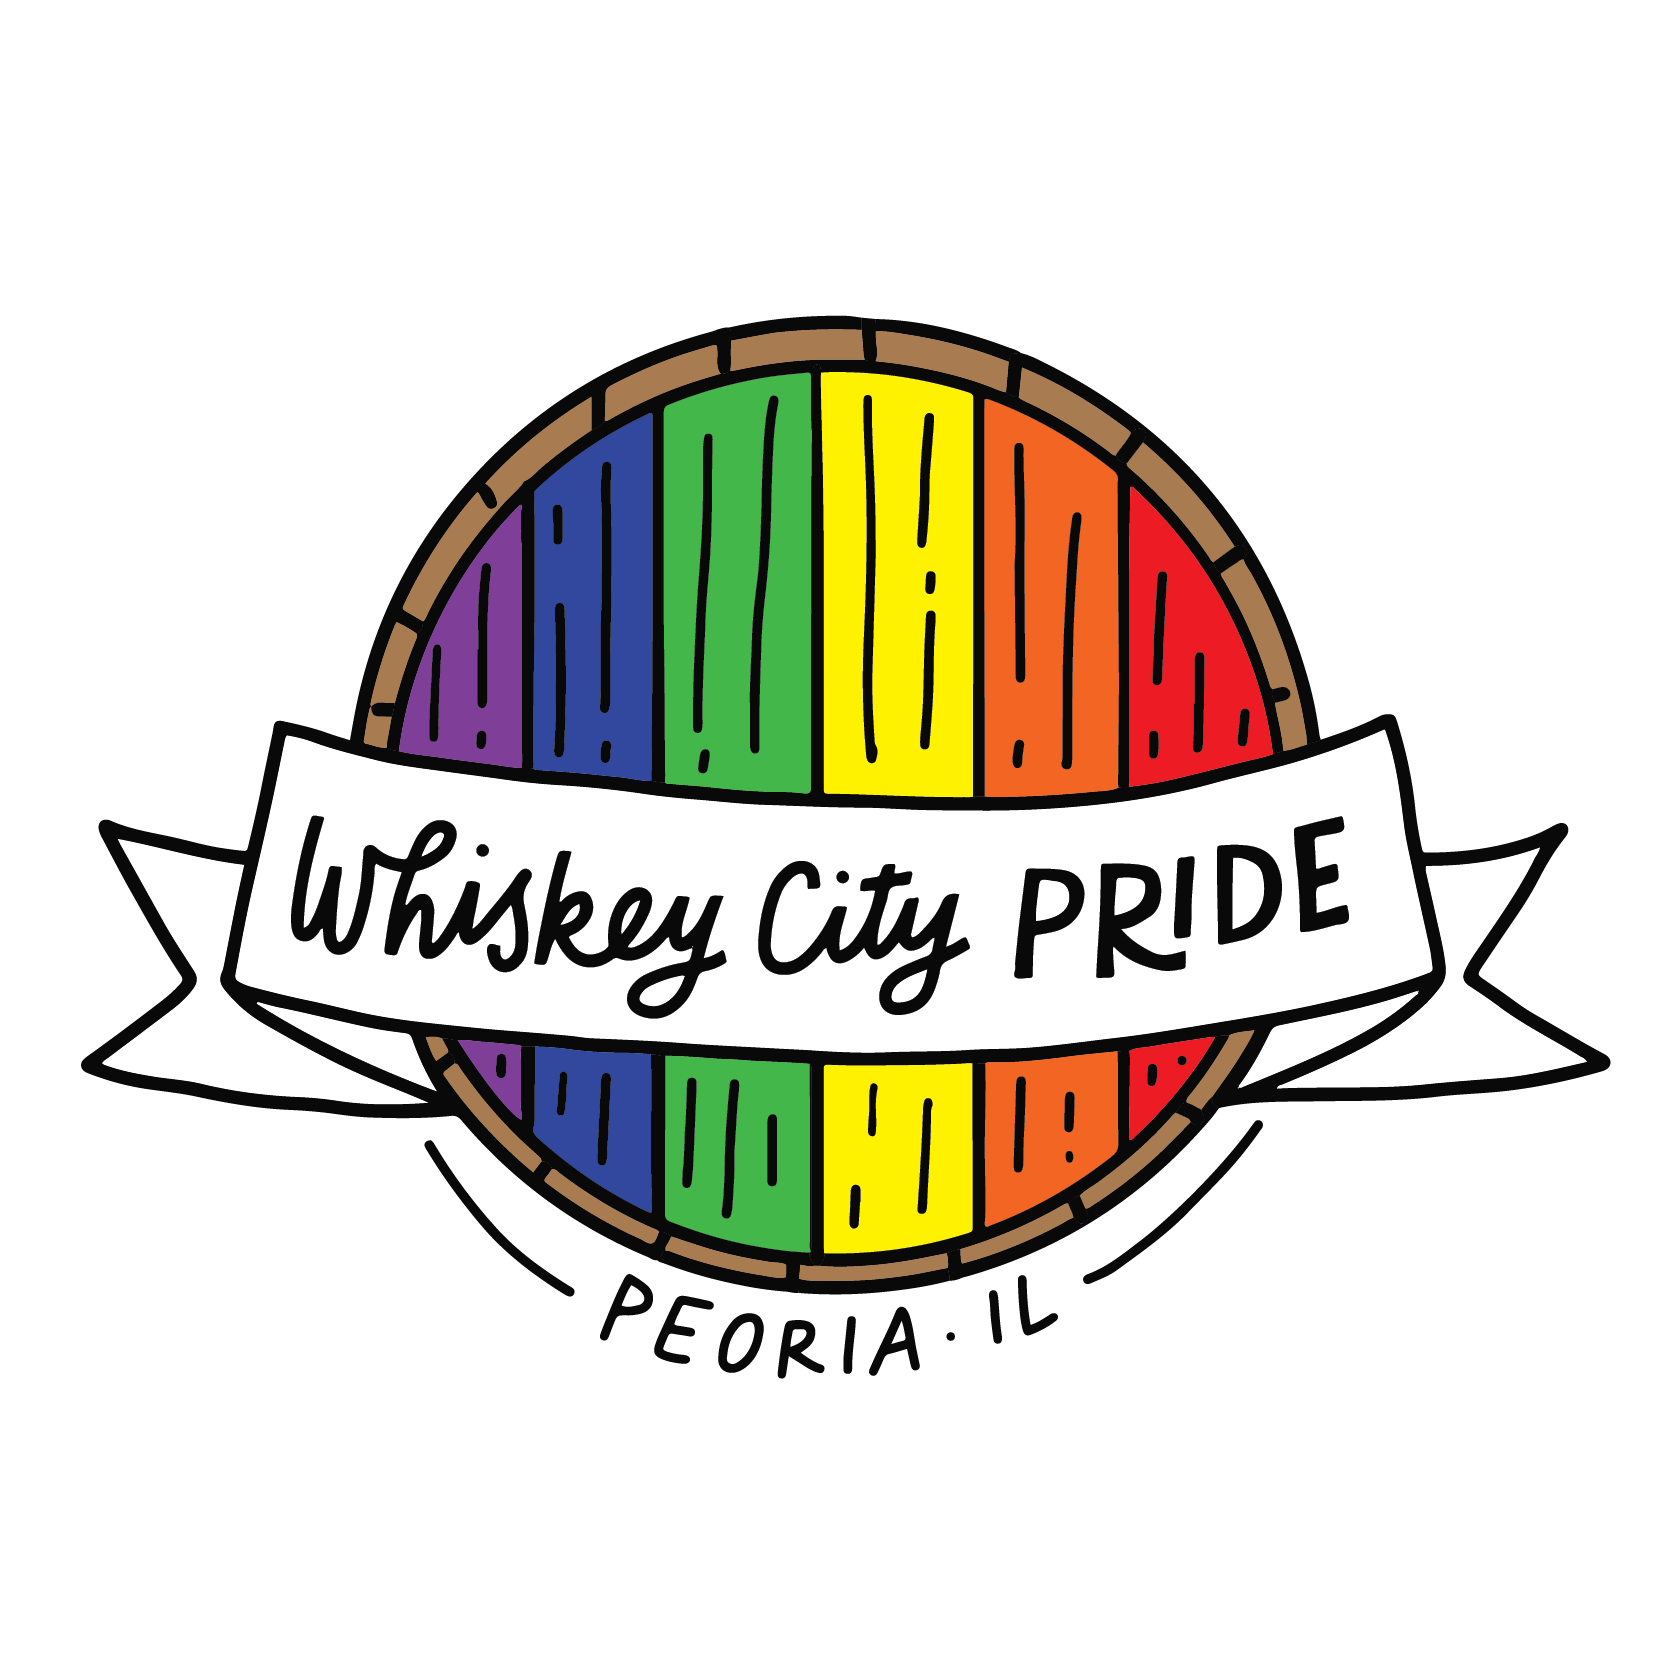 Copy of Whiskey City Pride Event Logo Design for Peoria Proud